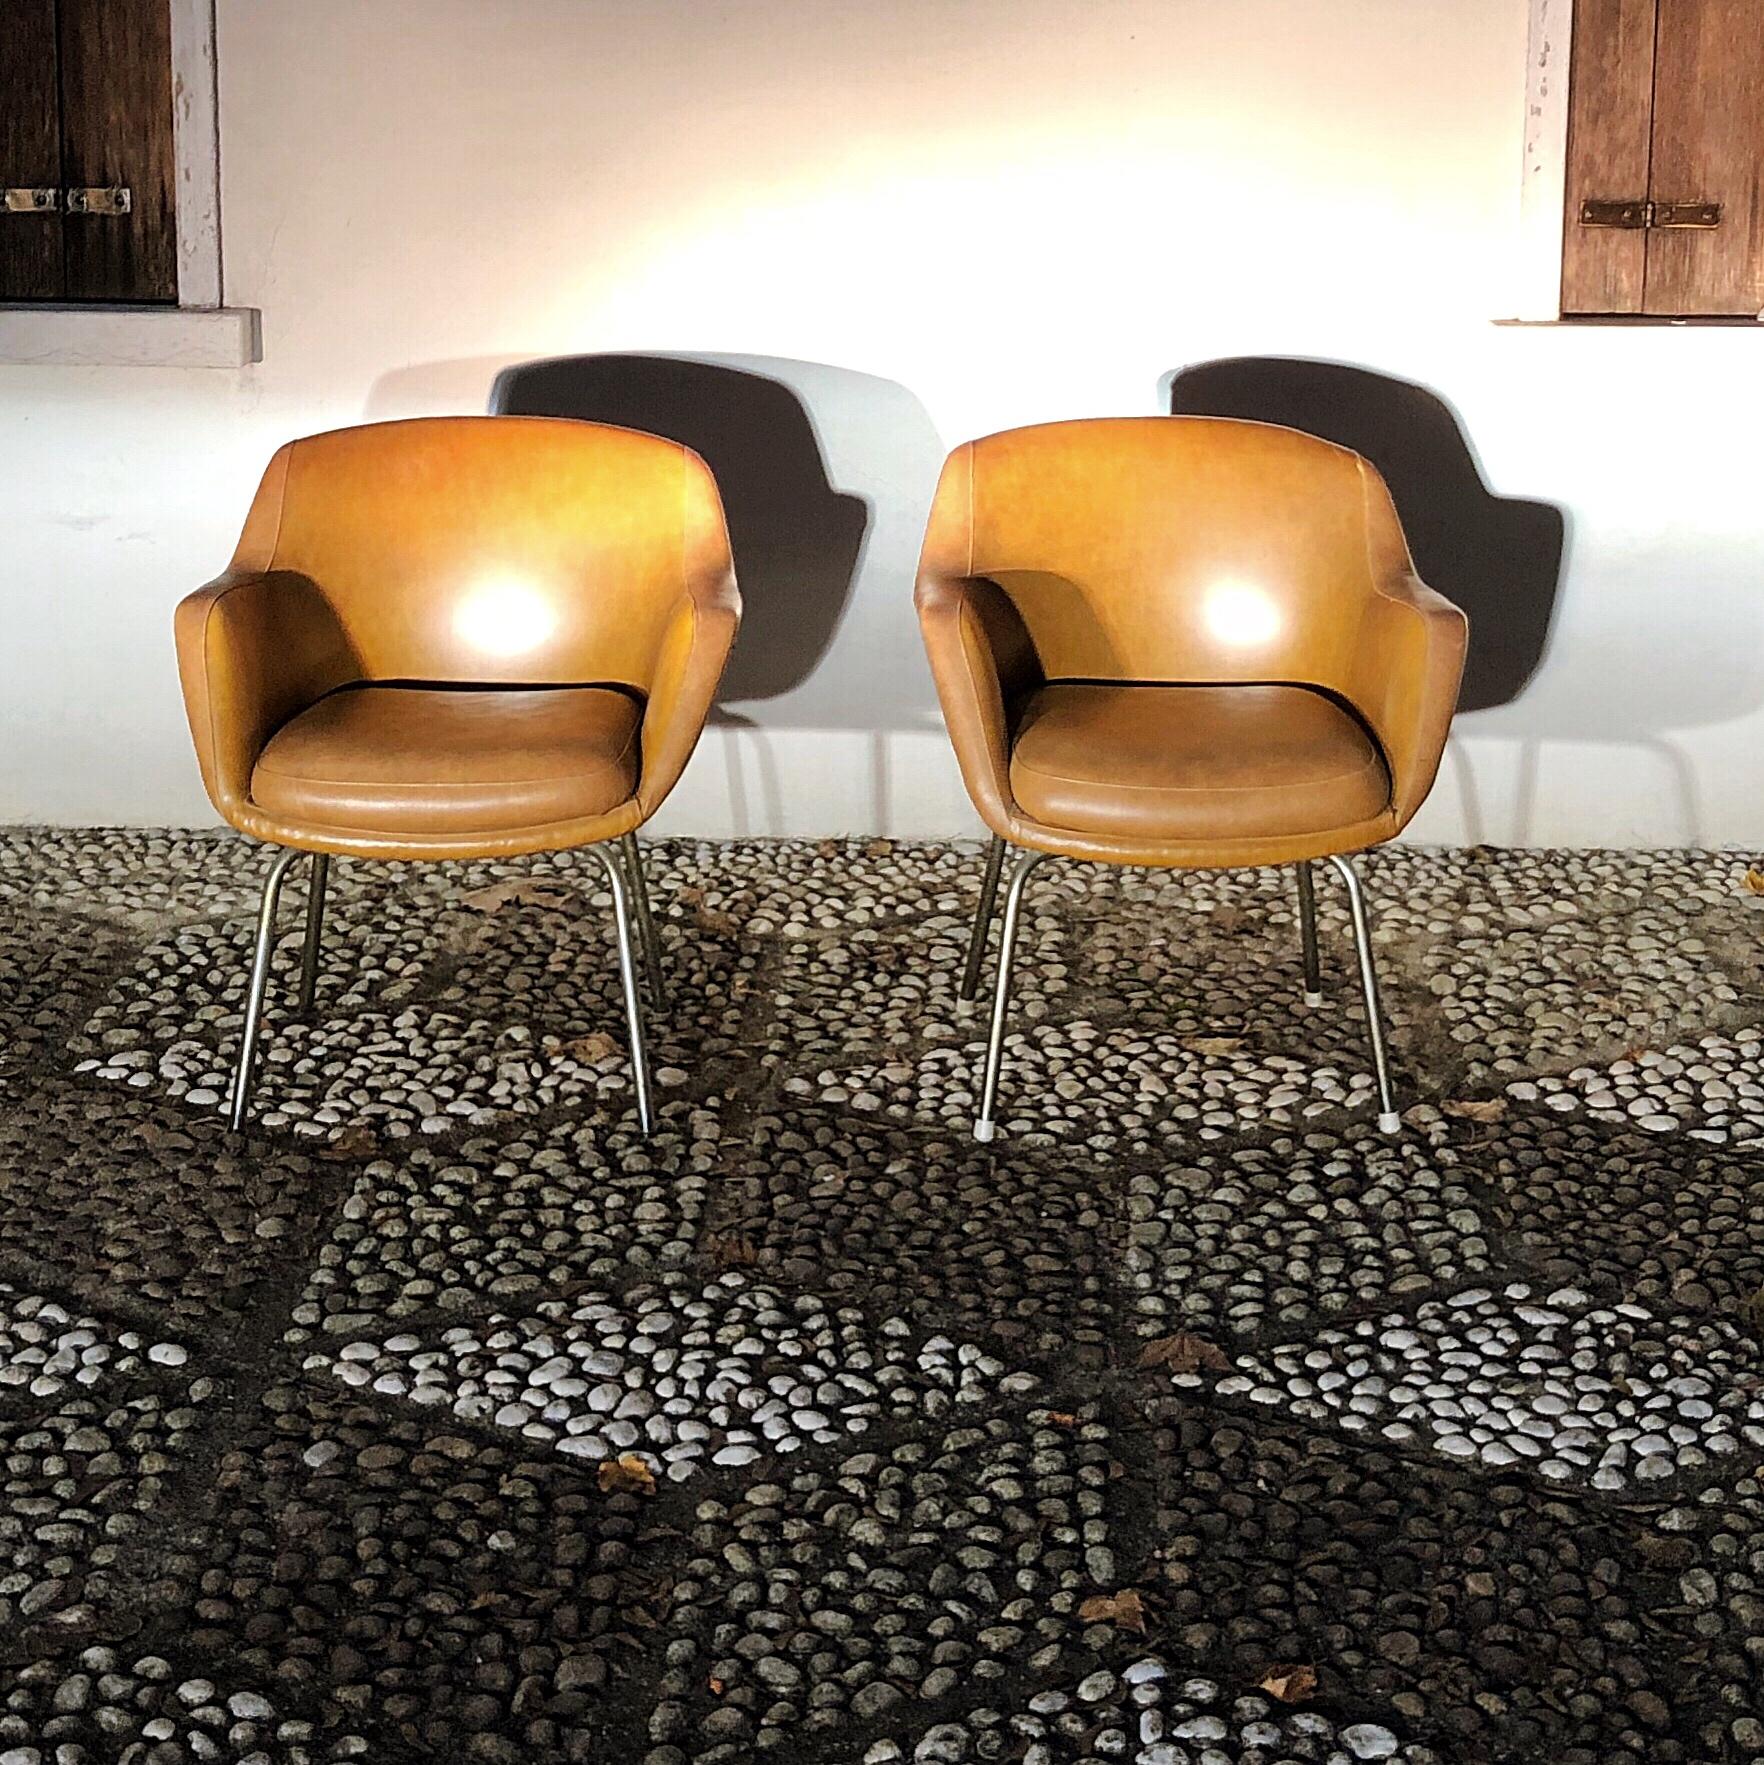 Pair of Midcentury Brown Leather Armchairs in the Style of Arne Jacobsen, 1960s For Sale 5